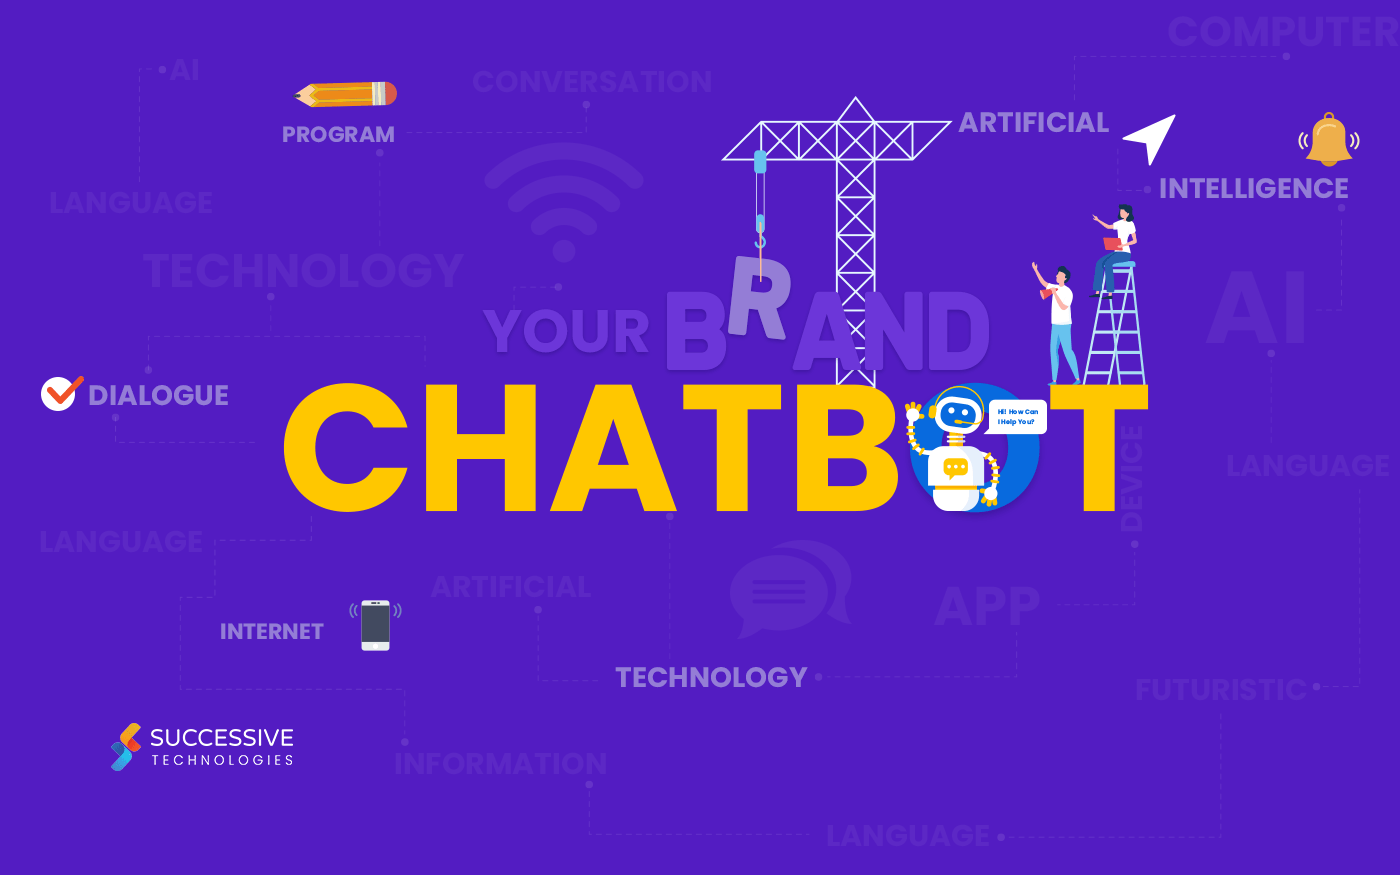 How To Uplift Your Brand Using Chatbots